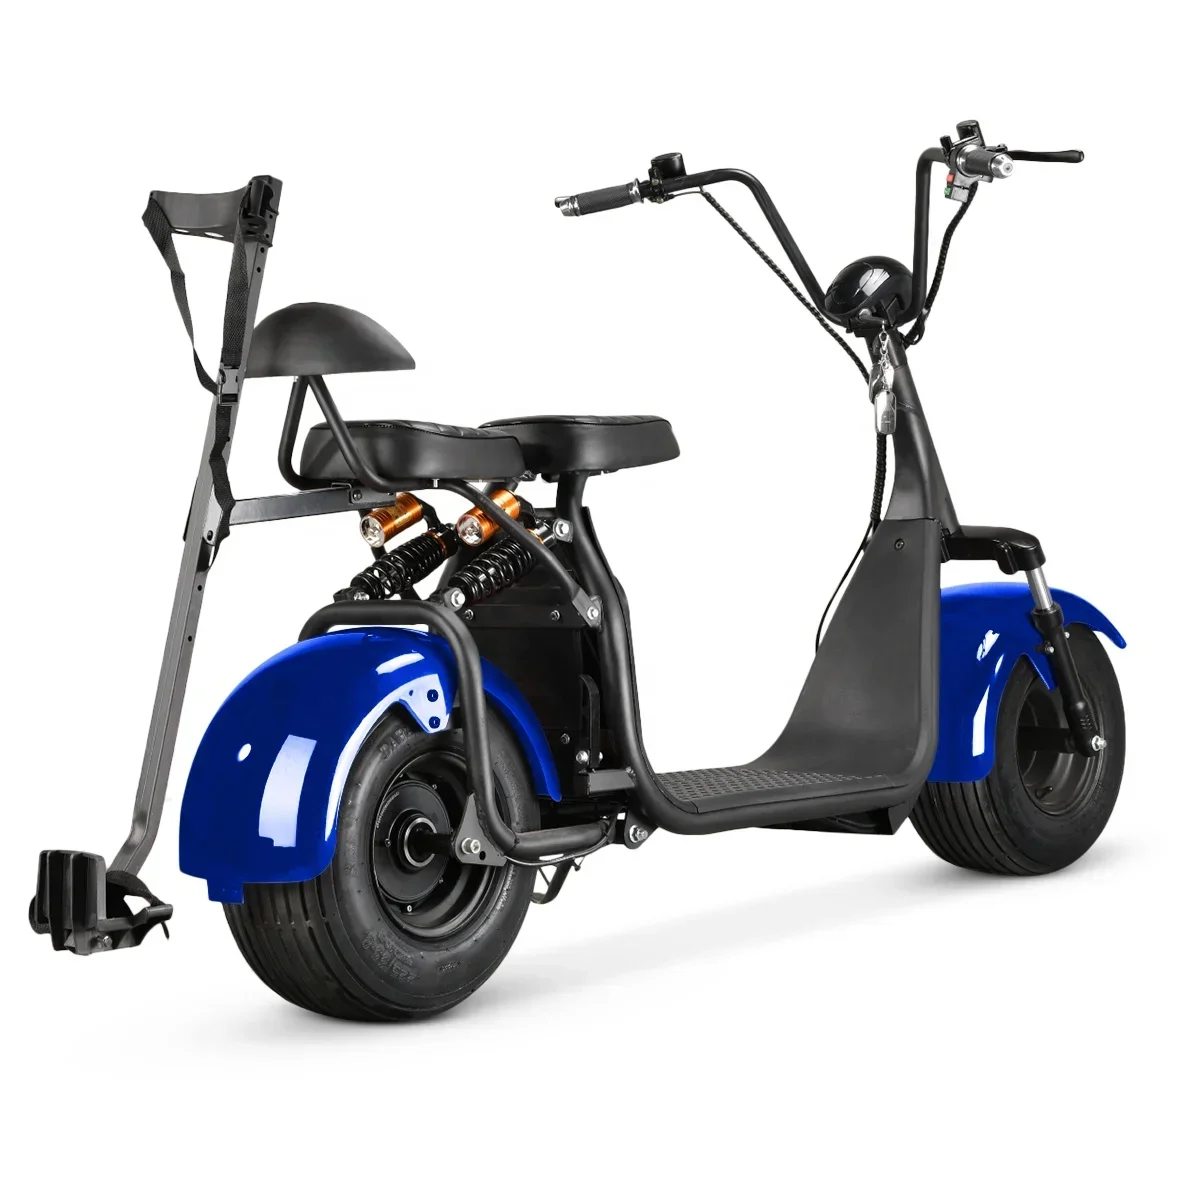 

2000w Electric Golf Scooter 2 Seat Fat Tire Golf Carts Electric Motorcycle Ebike US Warehouse Golf Rack